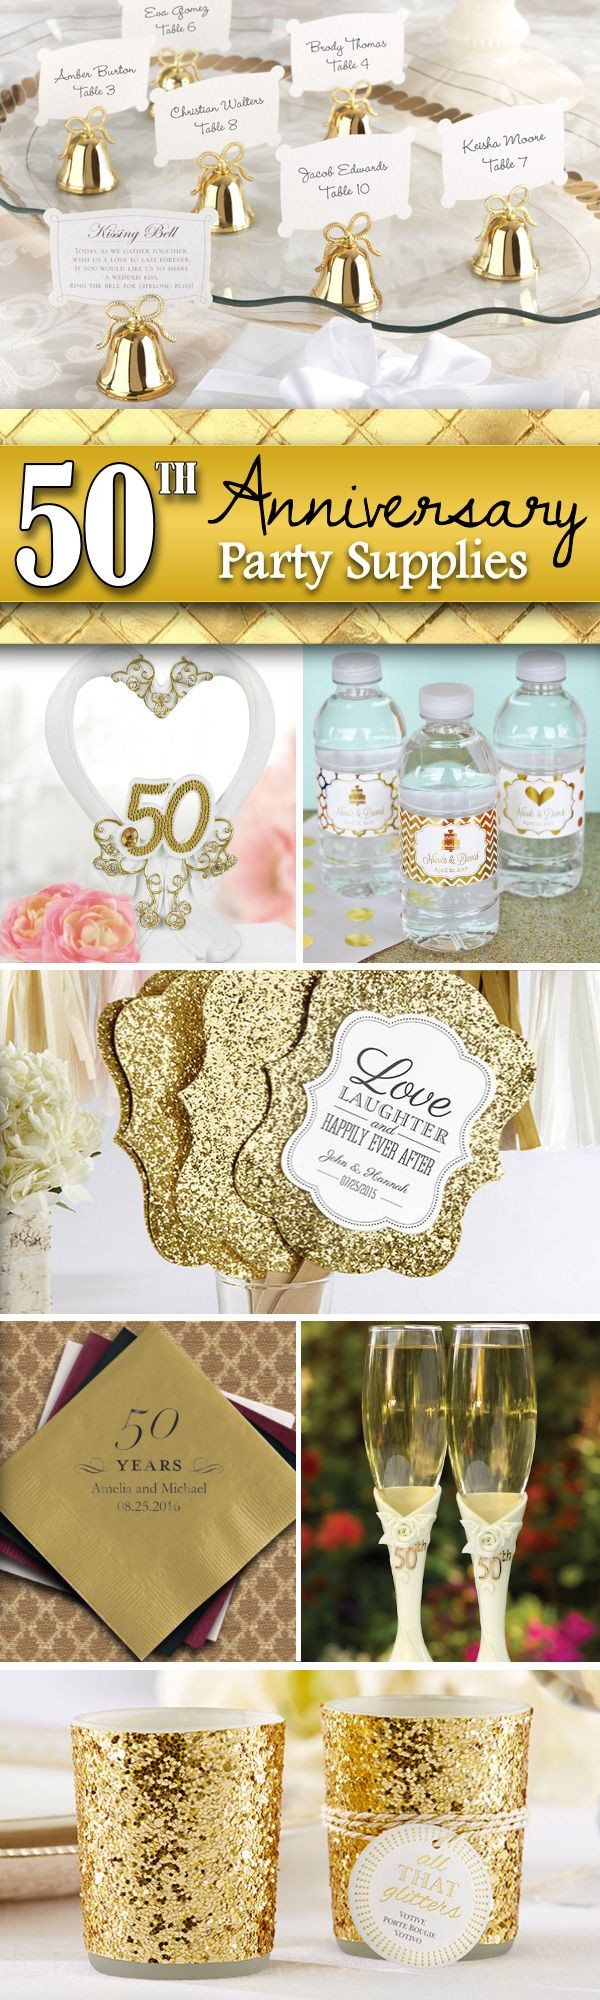 50th Wedding Anniversary Party Favors
 Throwing a 50th Wedding Anniversary Party Get all the